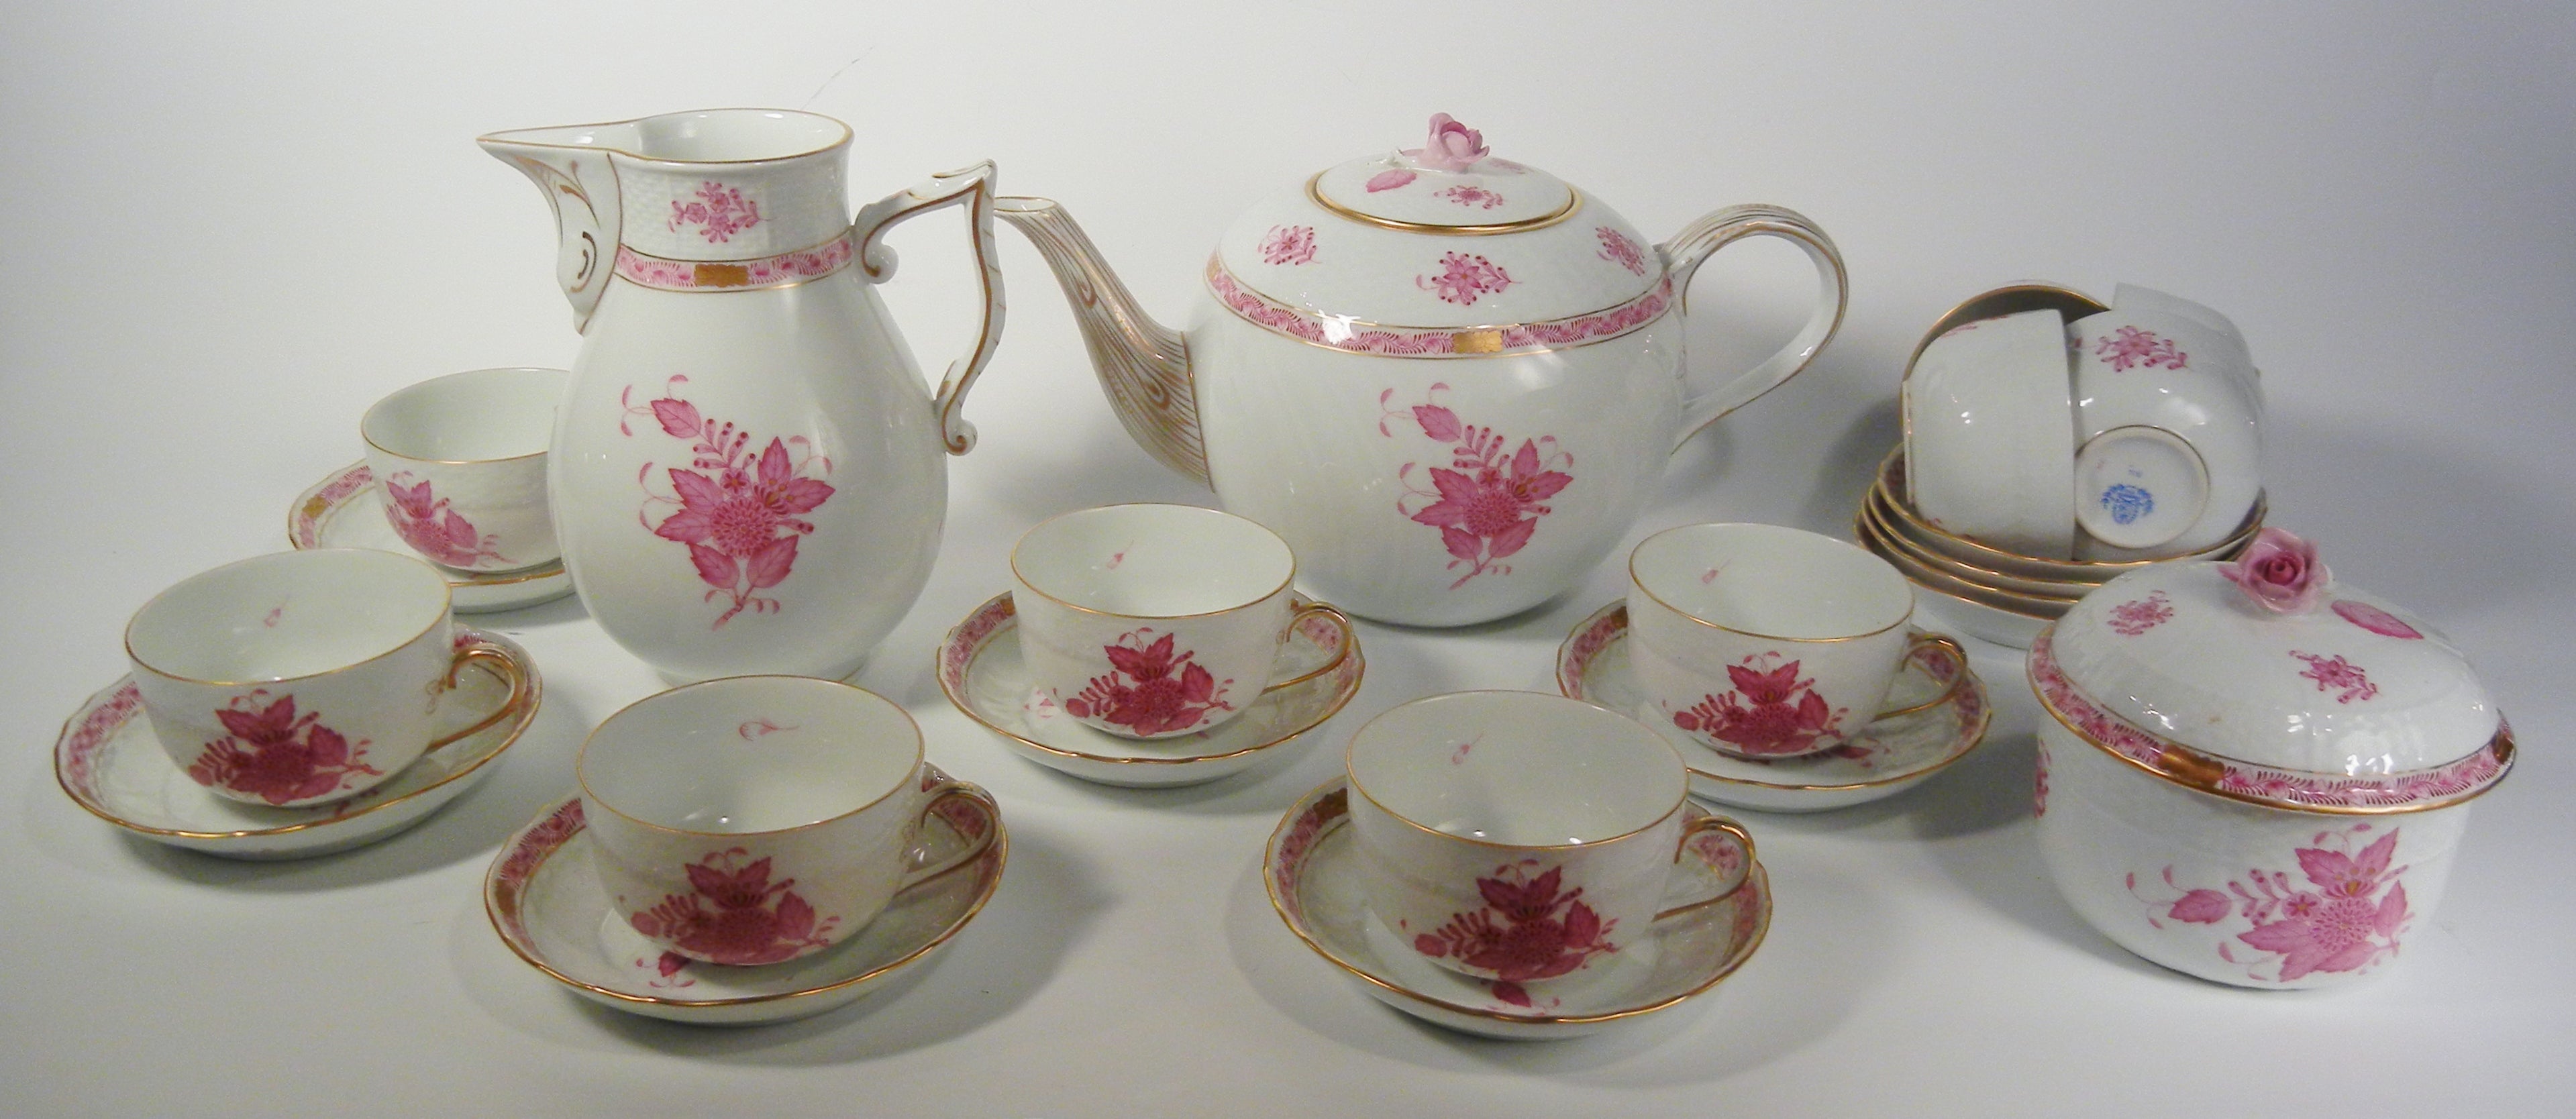 Herend "Chinese Bouquet" Large Tea Set 1976